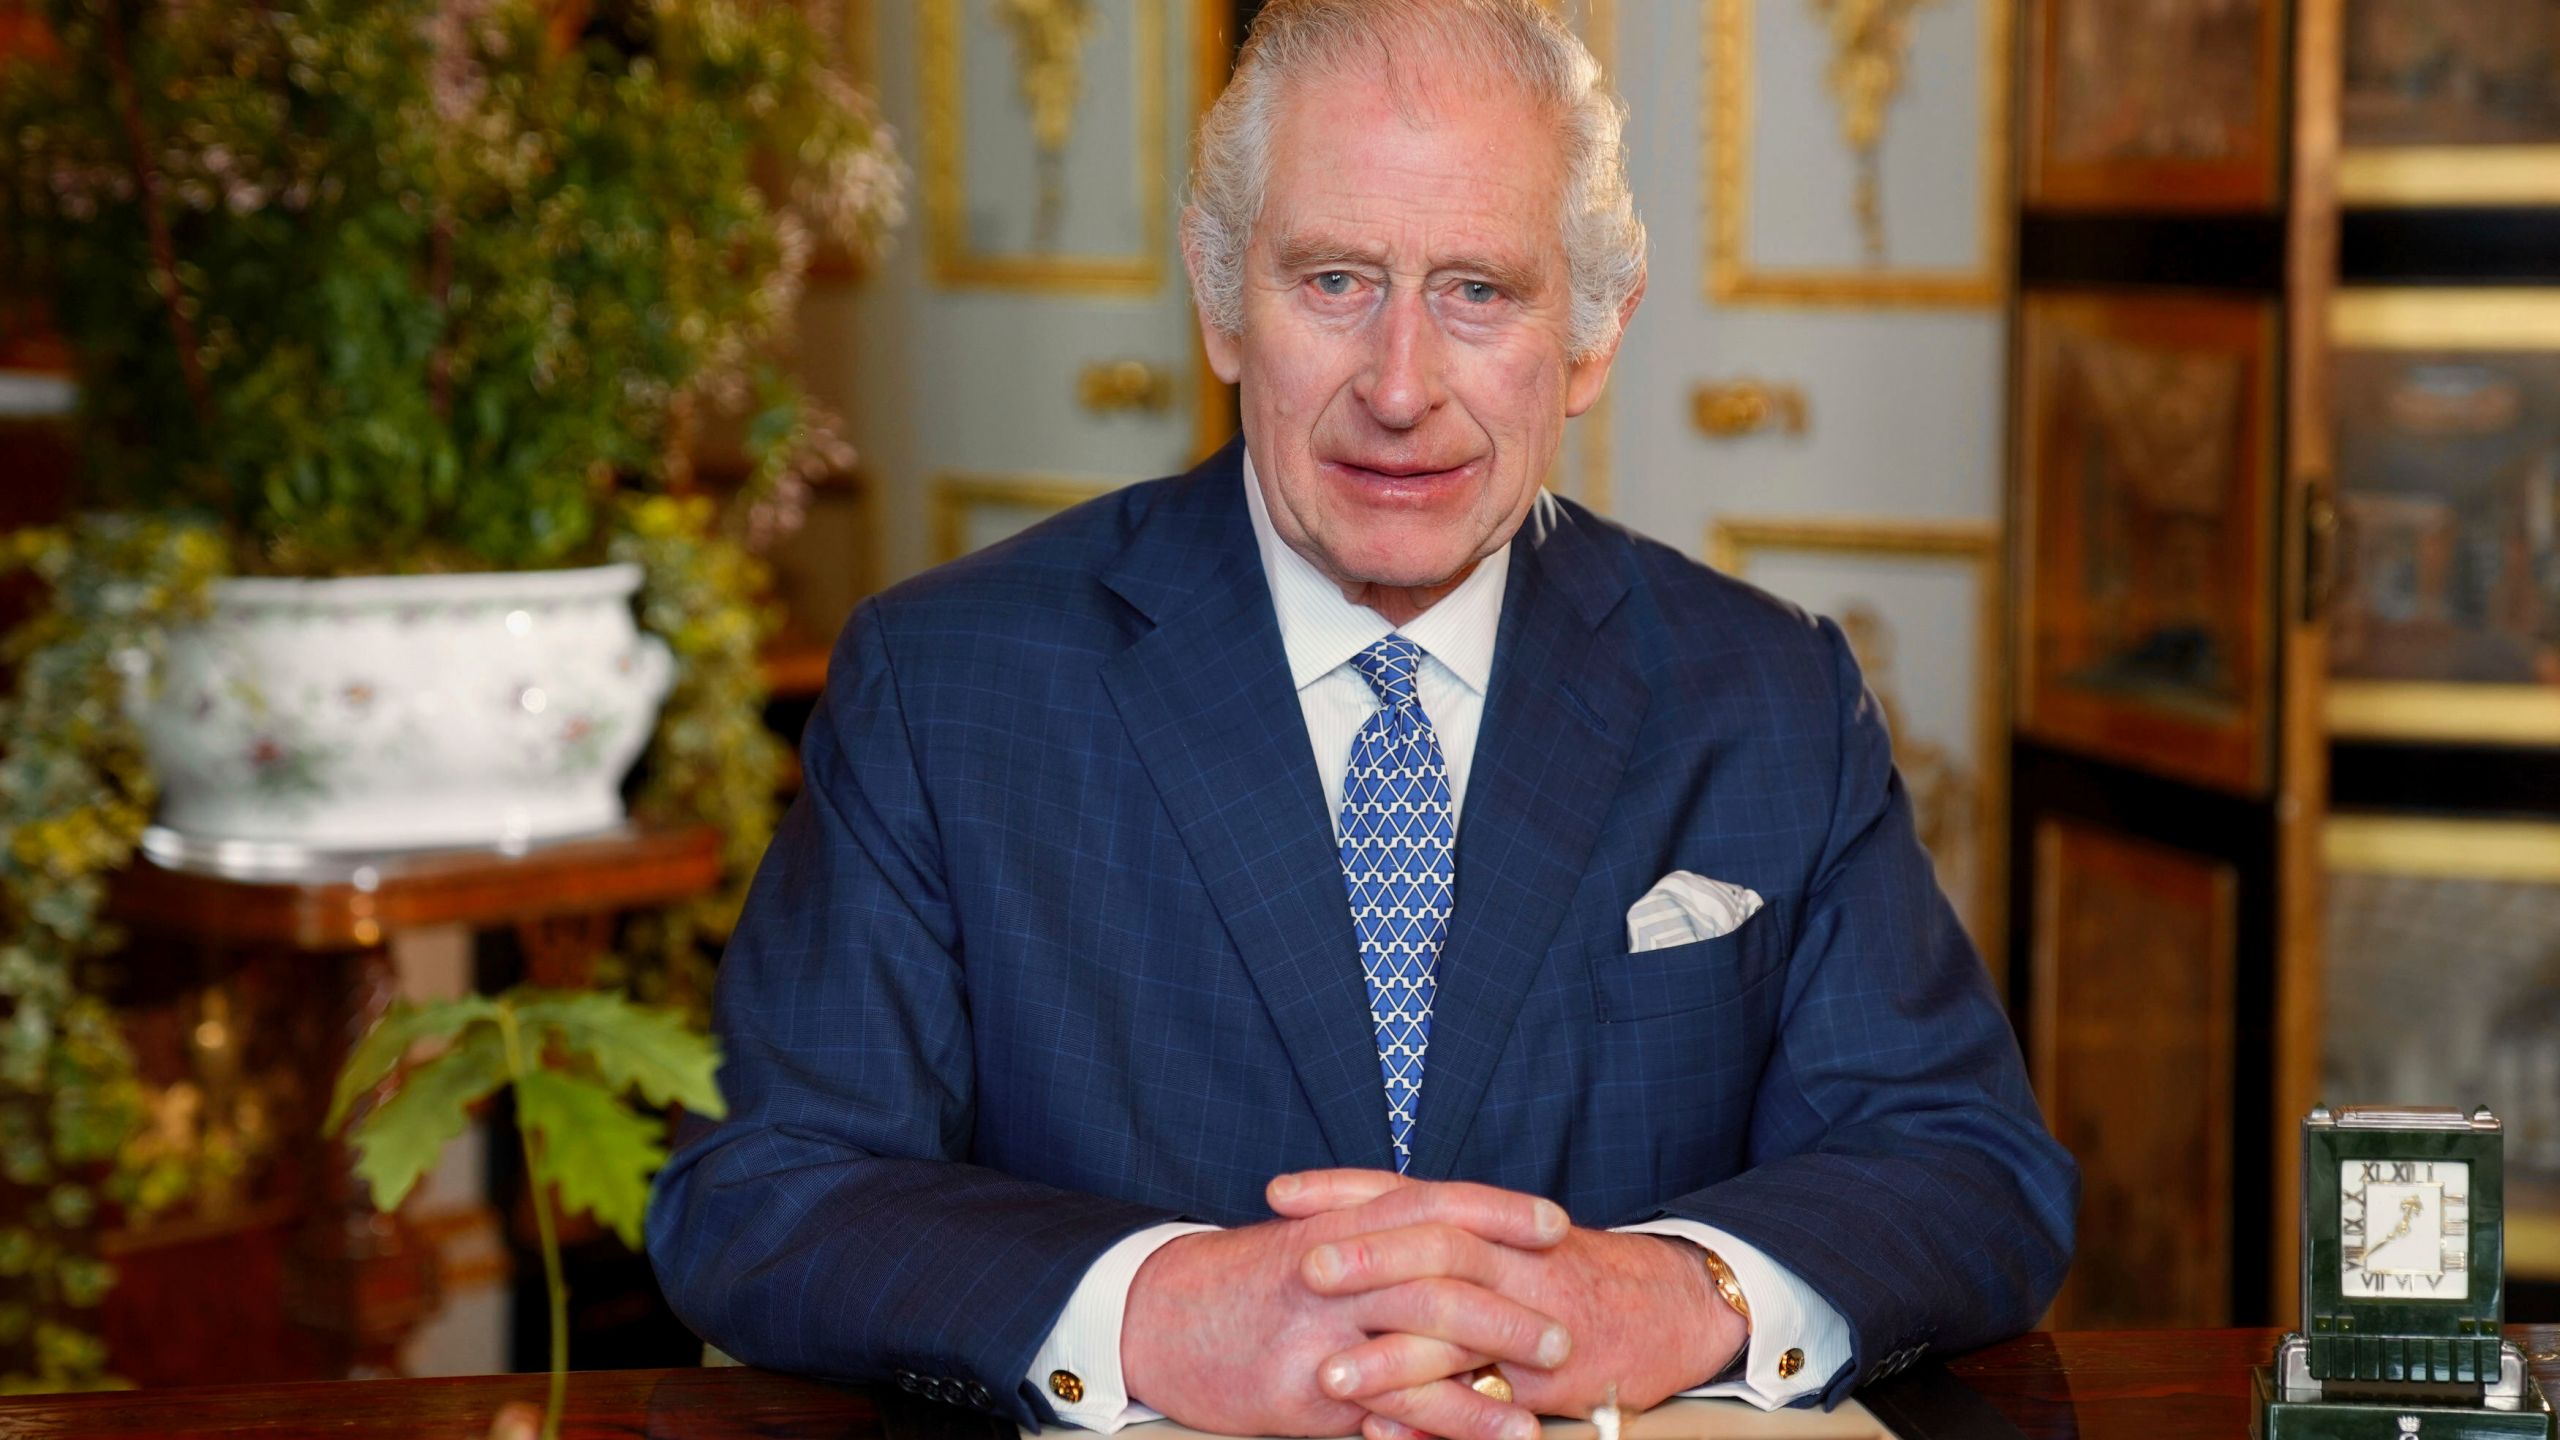 In this photo issued by the Royal Household on Monday March 11, 2024, Britain's King Charles III records the King's Commonwealth message, which was filmed in the White Drawing Room at Windsor Castle, Windsor, England in Feb. 2024. The King has pledged to continue to serve the Commonwealth "to the best of my ability", in his annual address to the family of nations. (Royal Household via AP)